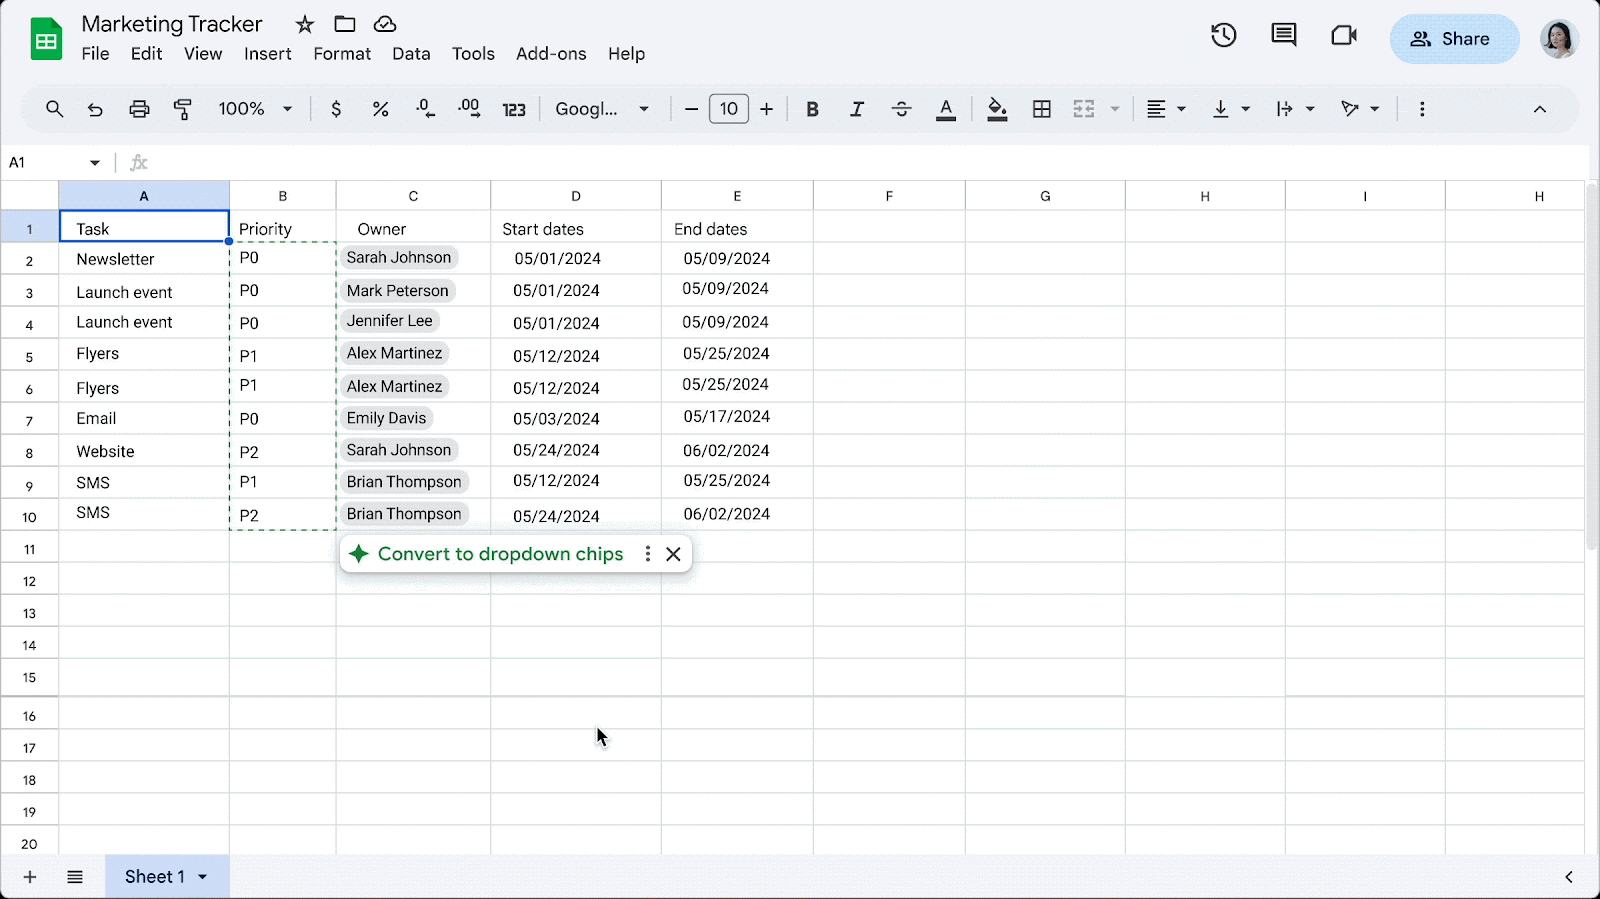 User clicks the new "Convert to dropdown chips" suggestion after selecting a range of data in a Google Sheets spreadsheet